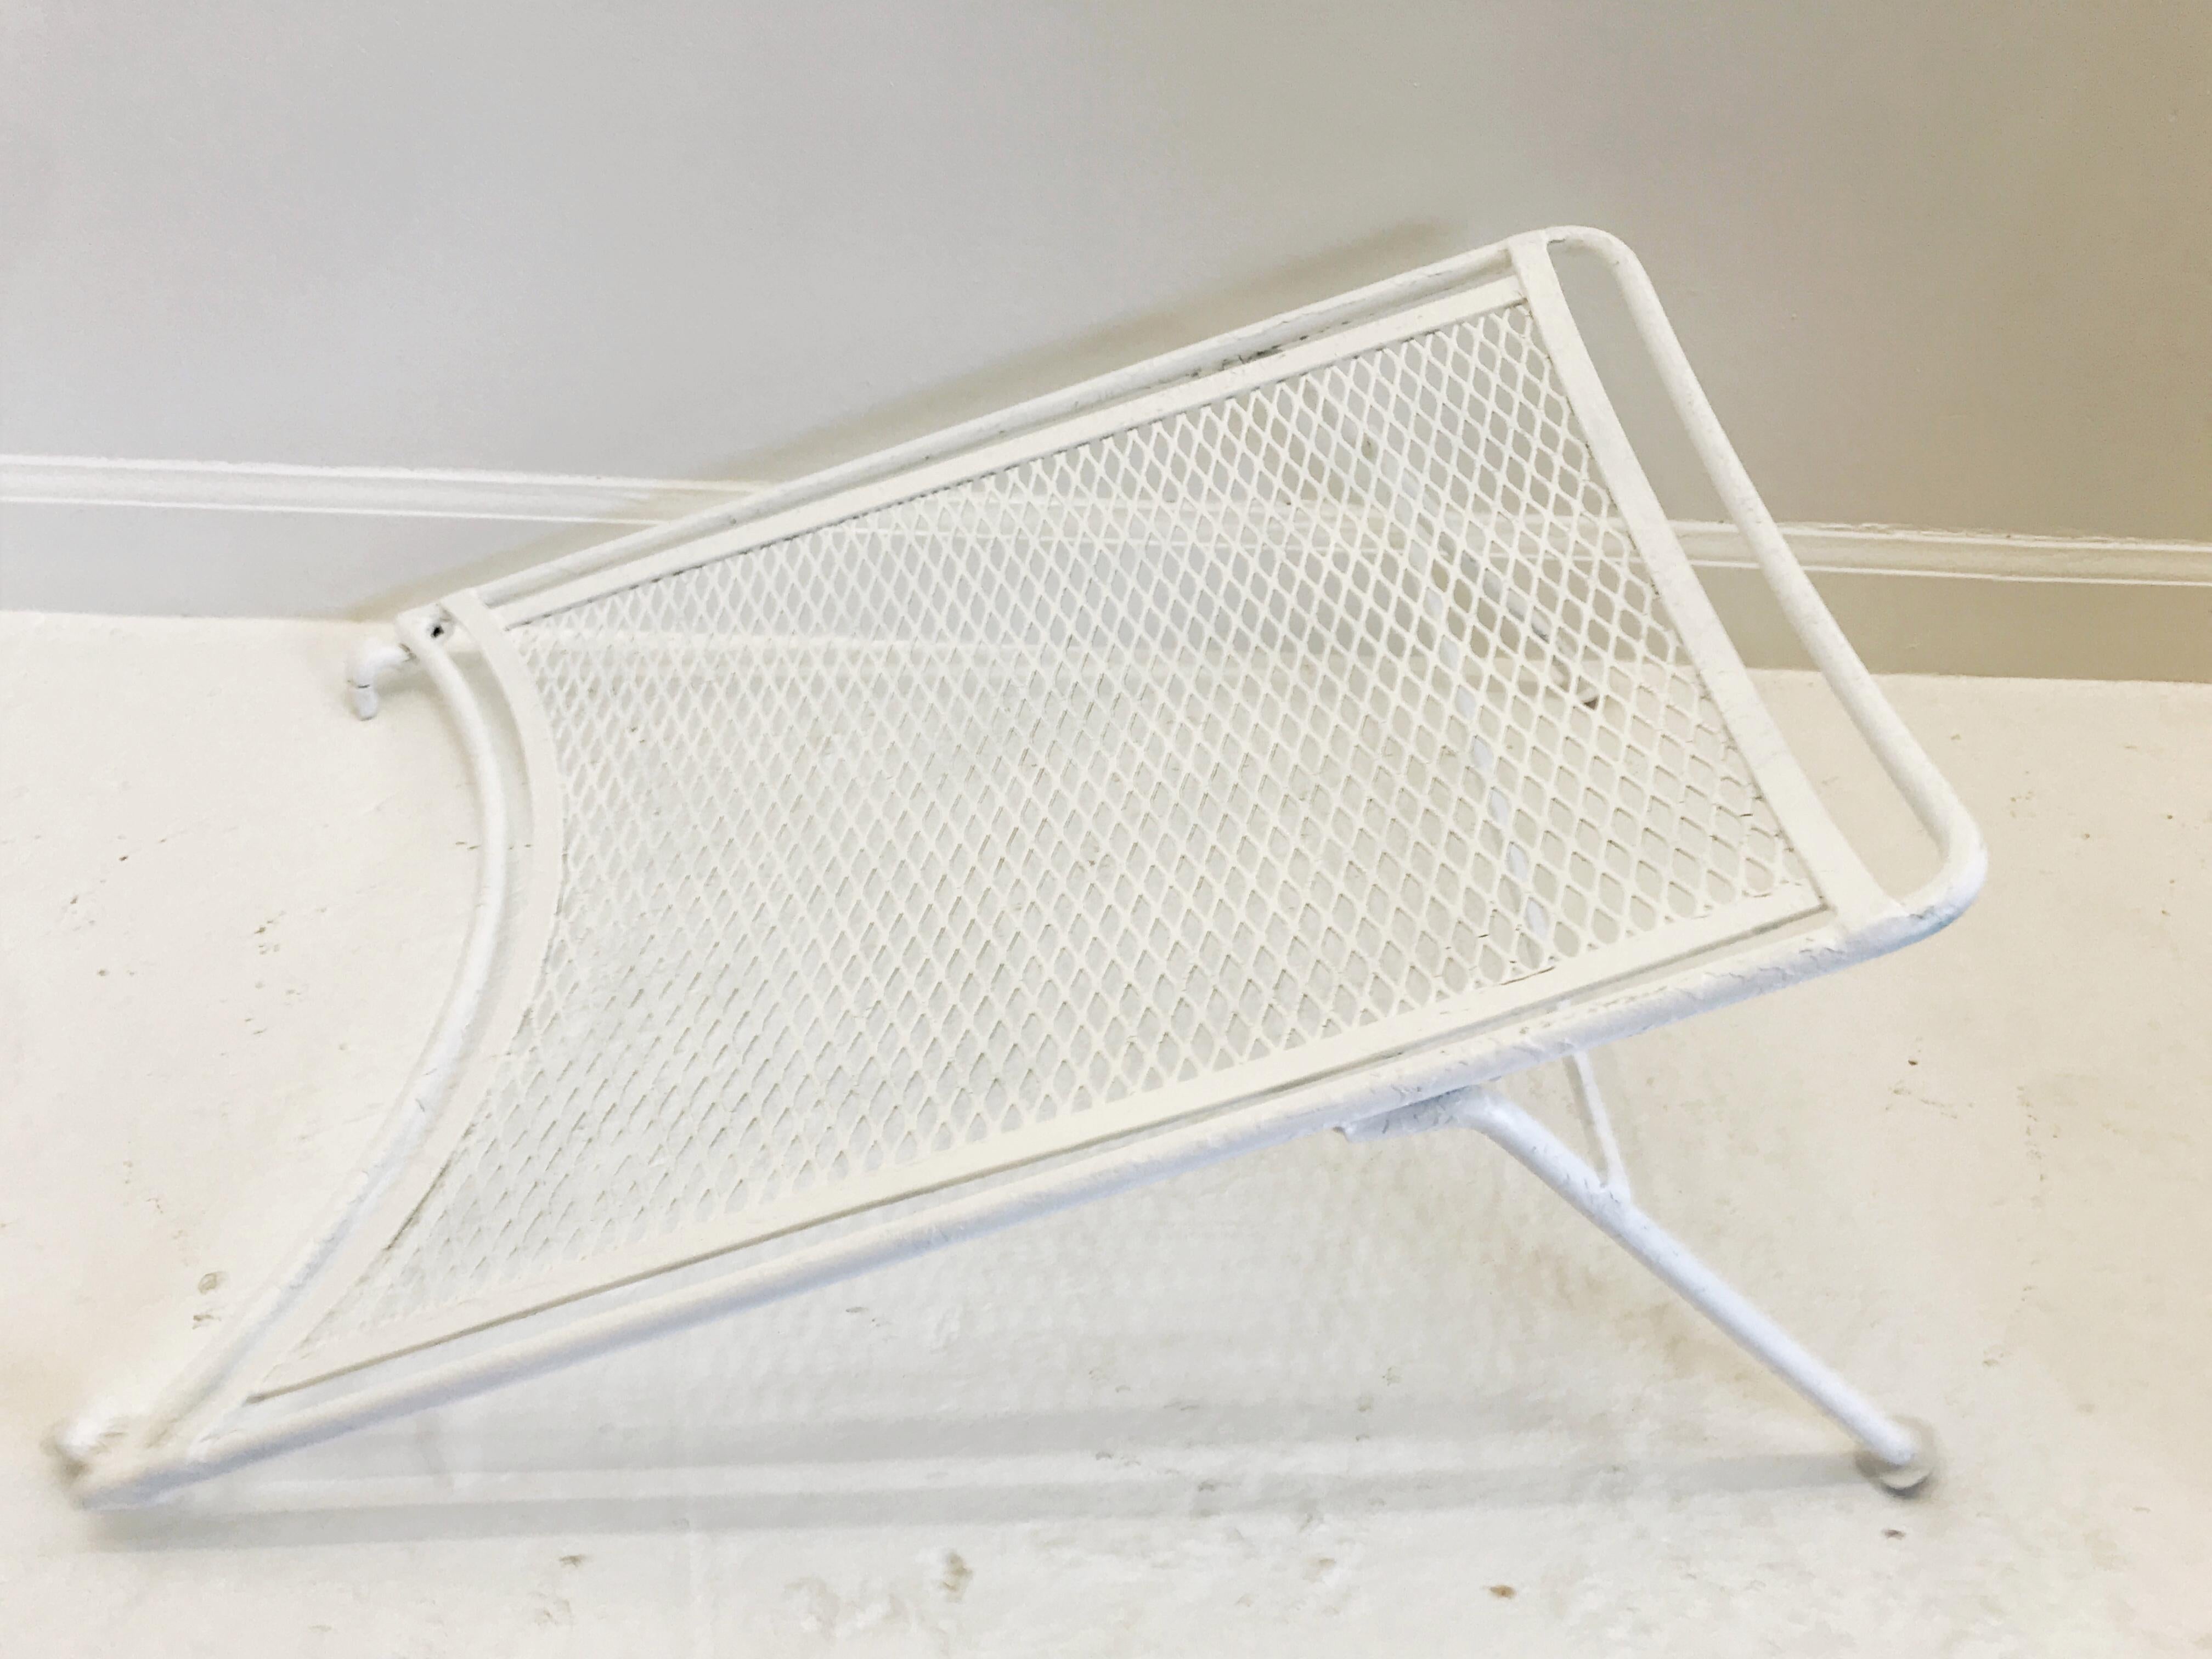 White Salterini Radar/ Hoop chair leg rest by Maurizio Tempestini, restored
At the time of this posting we have a pair of Radar/Hoop chairs in stock, sold separately, see the last two listing photographs, please refer to 1st Dibs item #